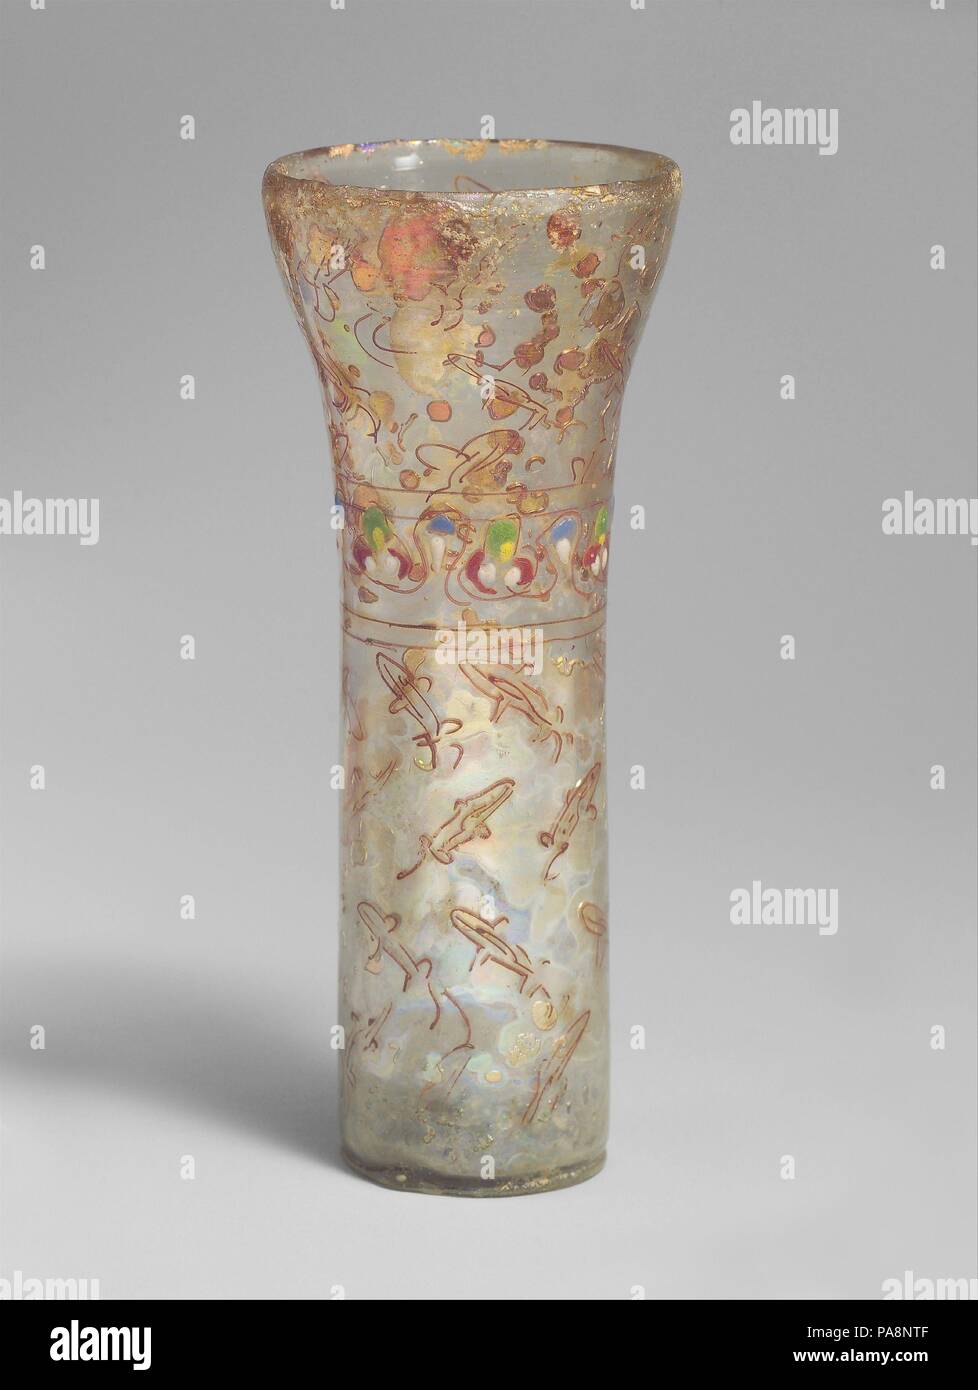 Beaker with Fish Motifs. Dimensions: H. 5 1/4 in. (13.3 cm)  Diam. 2 1/8 in. (5.4 cm). Date: 13th-14th century.  Glass decorated with contrasting colors was common in the early Islamic period and continued to be made well into the thirteenth century, as is exemplified by these marvered, enameled, and applied glass beakers. Museum: Metropolitan Museum of Art, New York, USA. Stock Photo